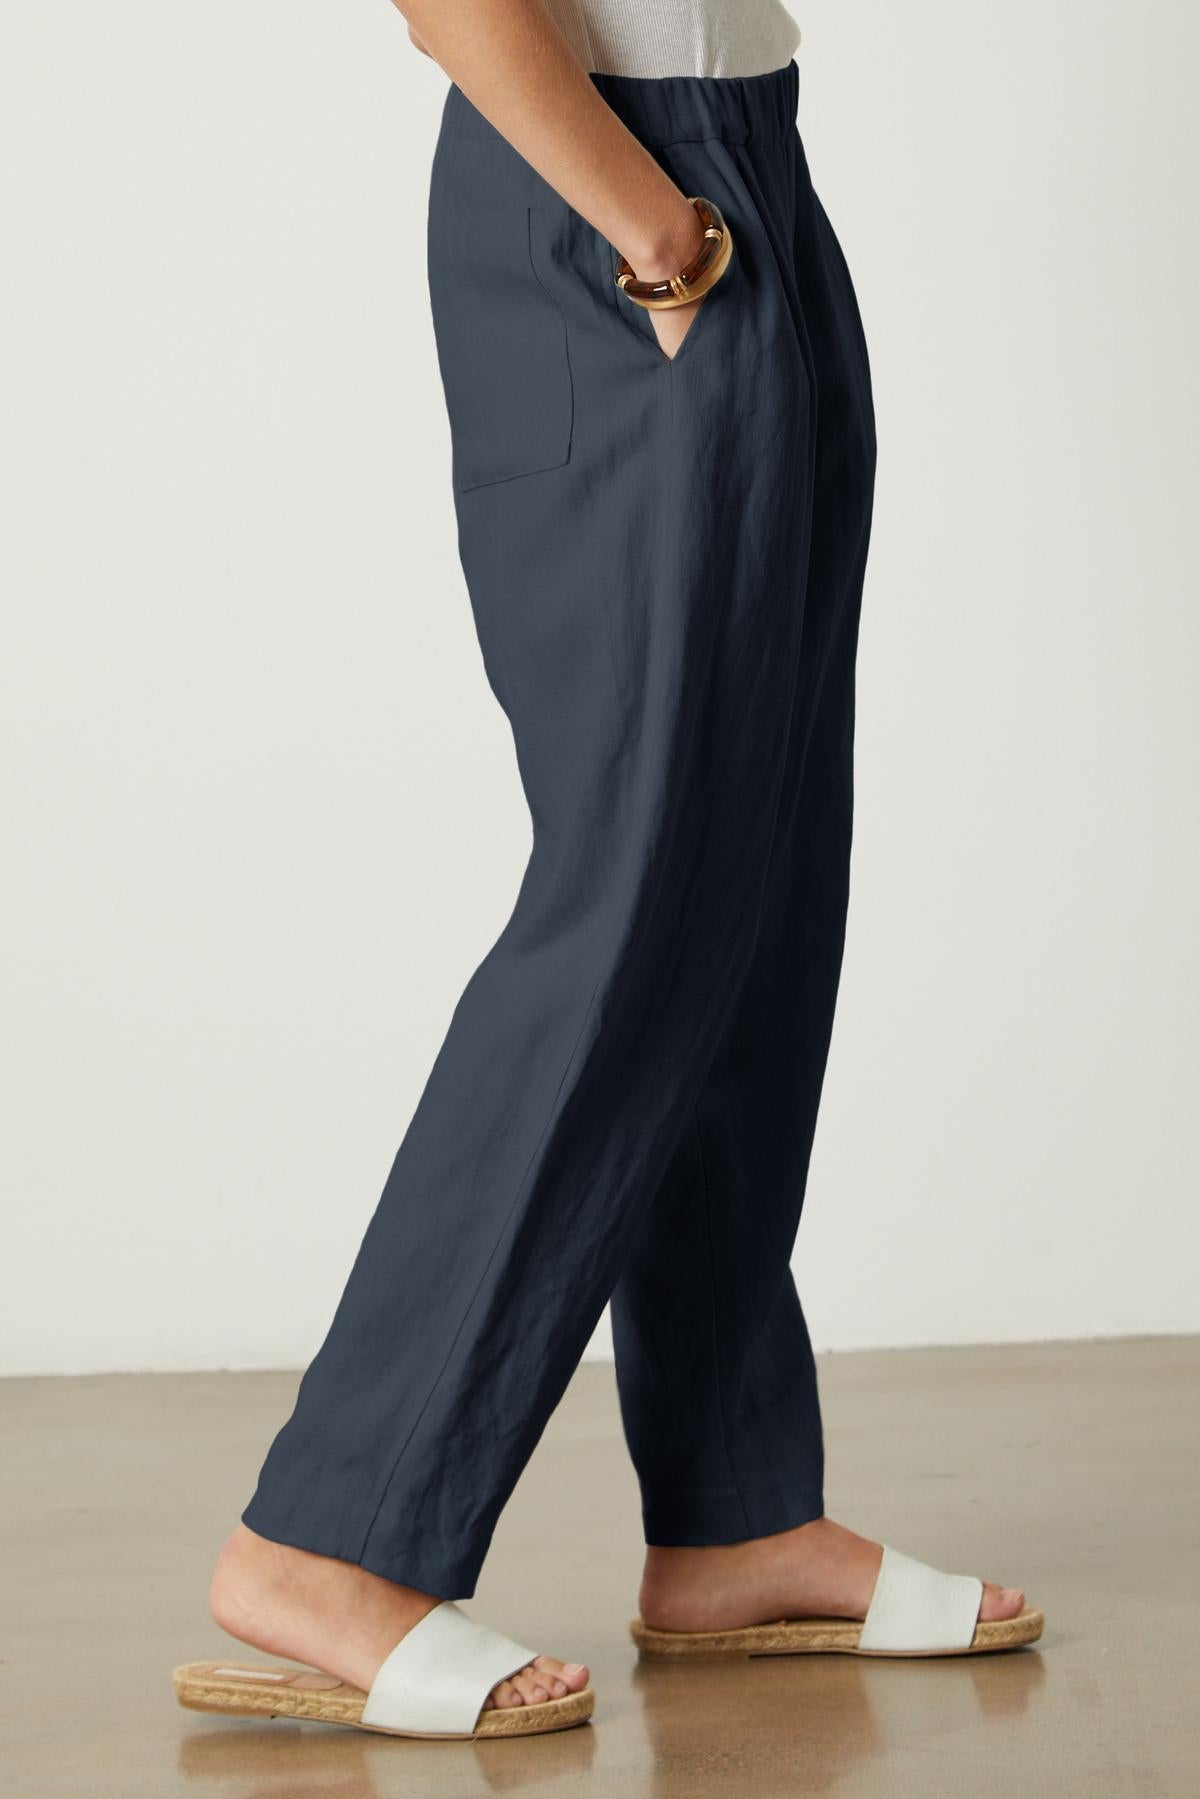 A woman wearing Velvet by Graham & Spencer navy linen trousers, with an elastic waist and rear patch pockets.-35921336303809